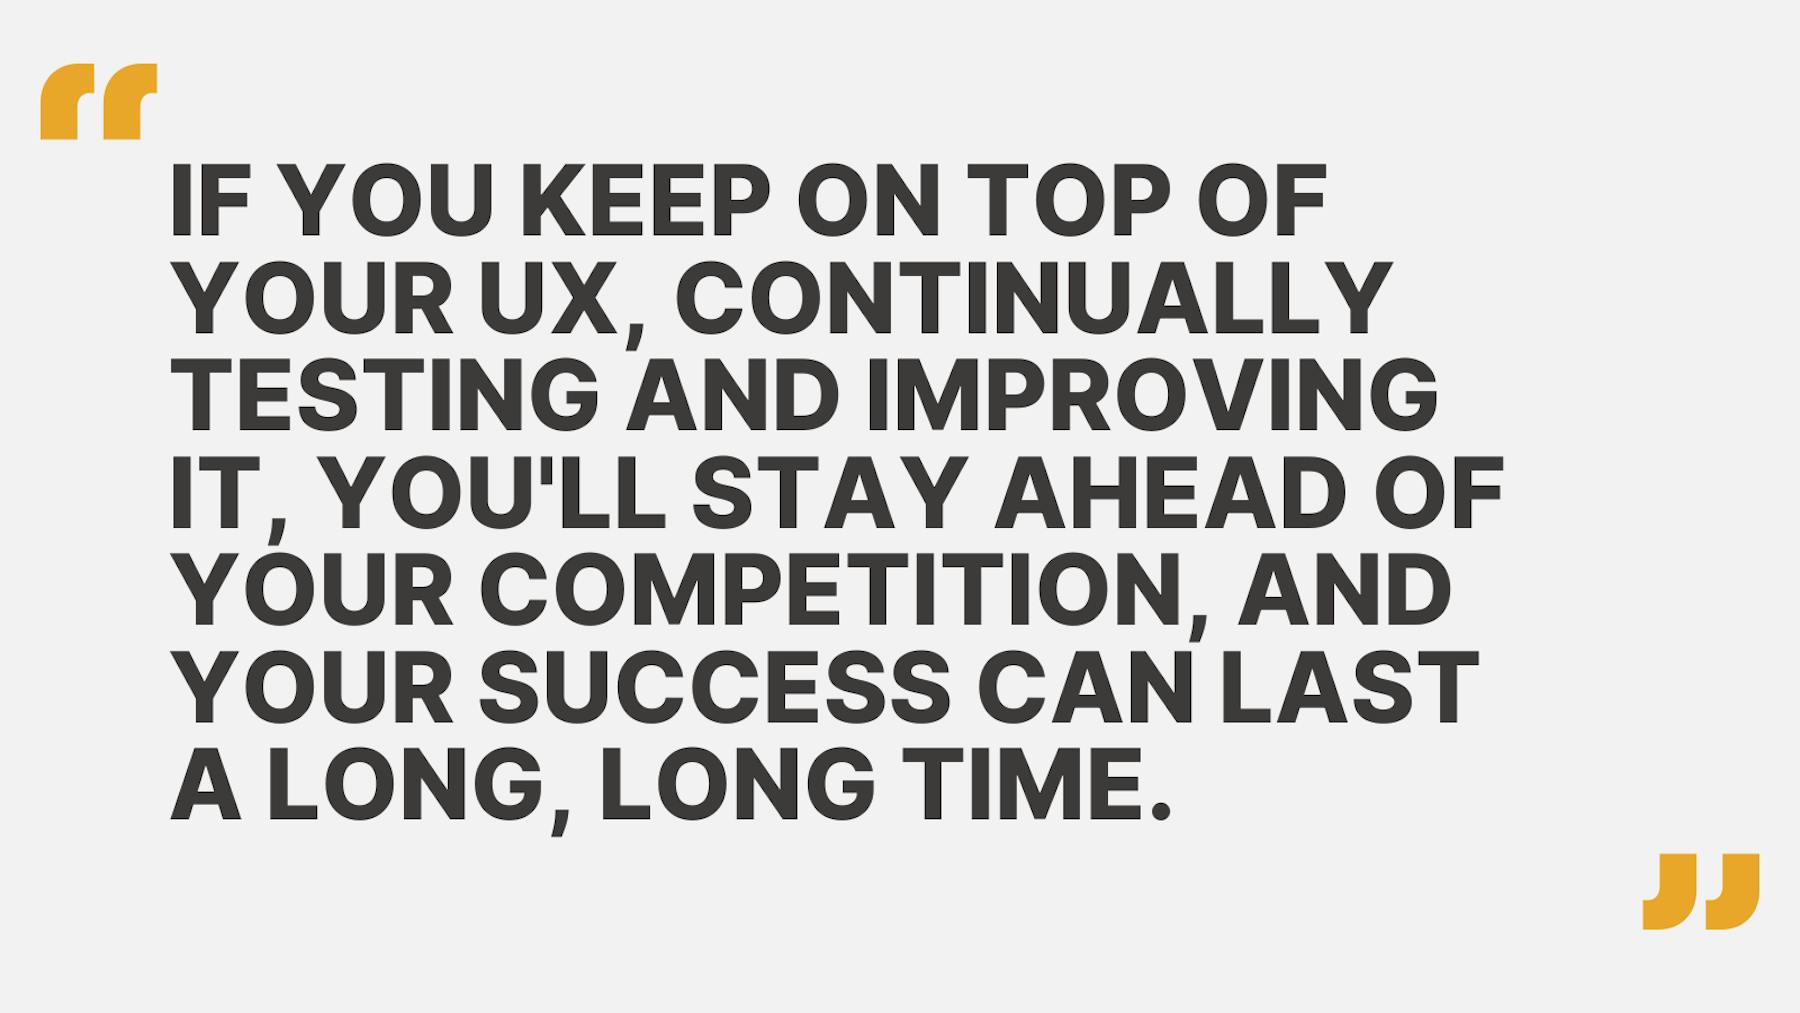 If you keep on top of your UX, continually testing and improving it, you'll stay ahead of your competition, and your success can last a long, long time.